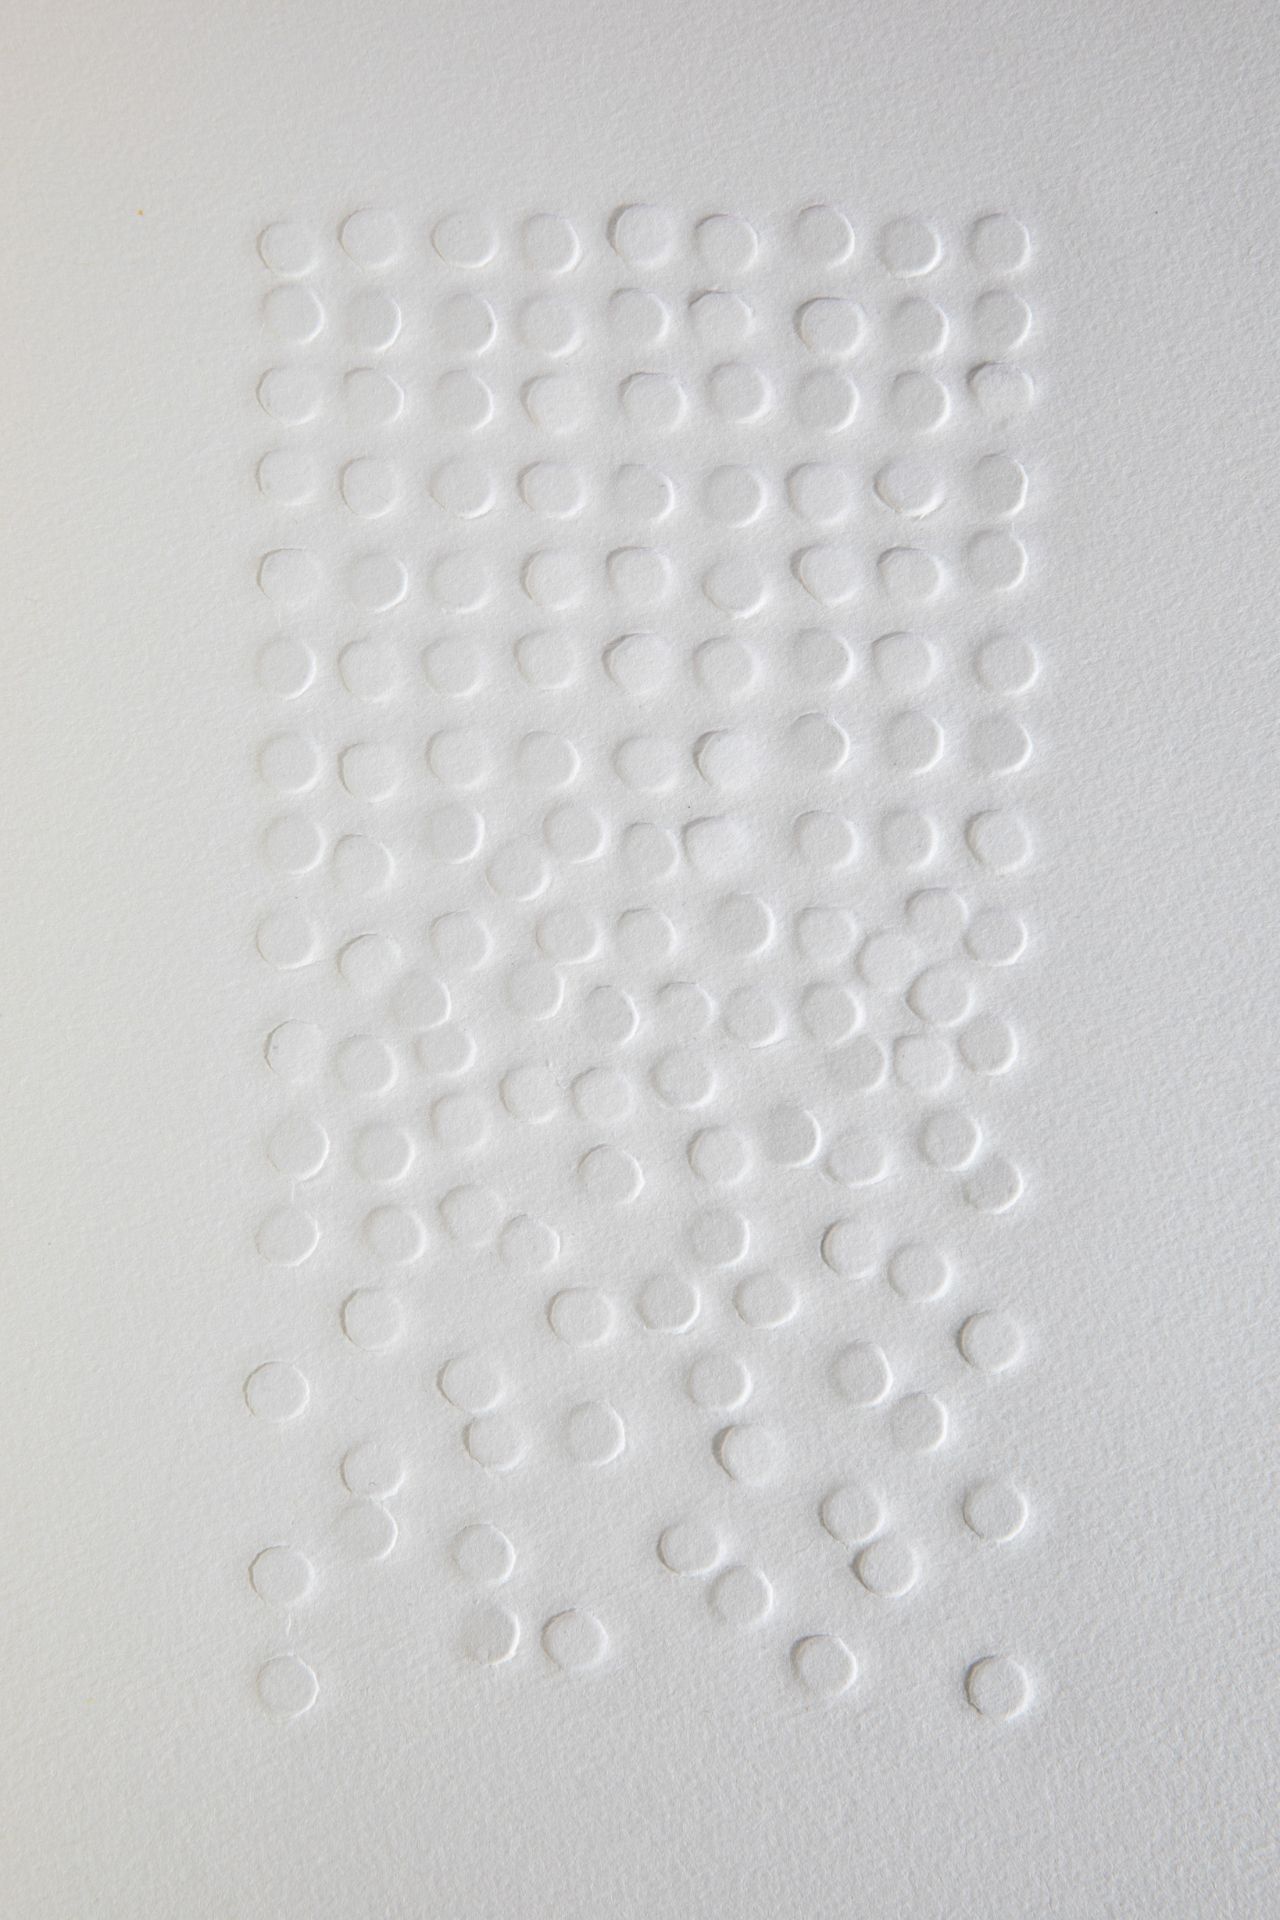 Günther Uecker*, nail head embossing, 1975. In ZET issue 10